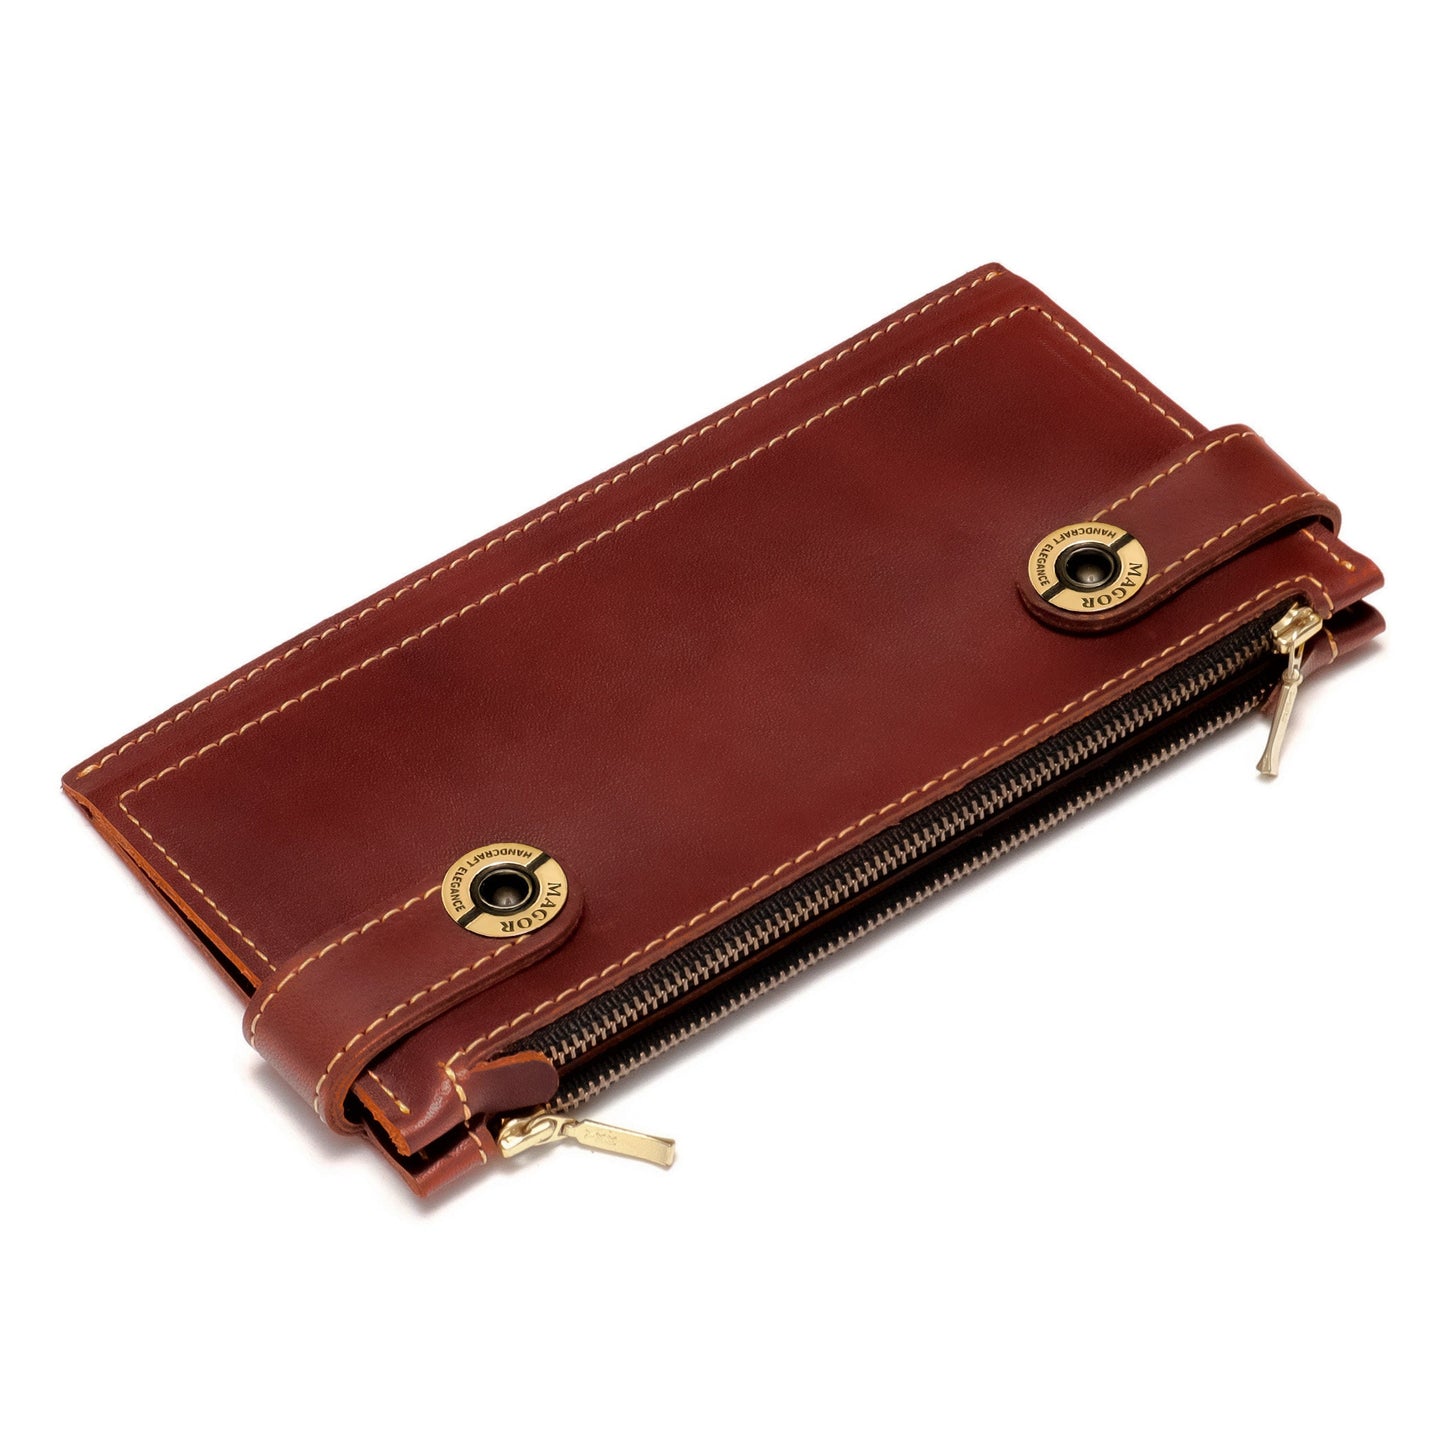 Leather Wallet-Large Capacity | Long Genuine Leather Wallet With Card Holder | Zip Coin Pocket | Passport Travel Holder | gift ideas